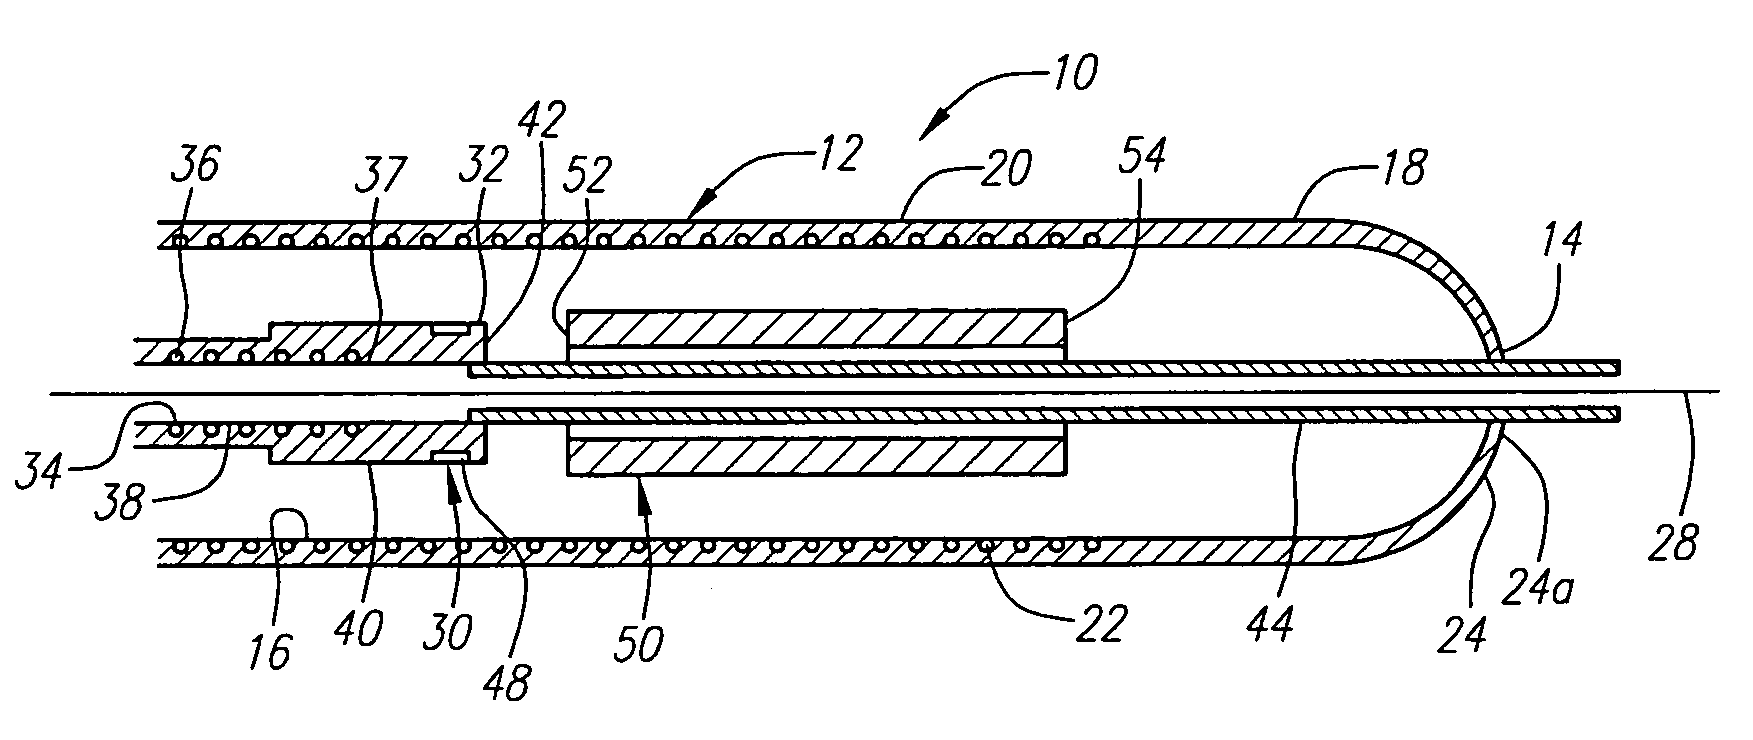 Apparatus for delivering endoluminal prostheses and methods of making and using them